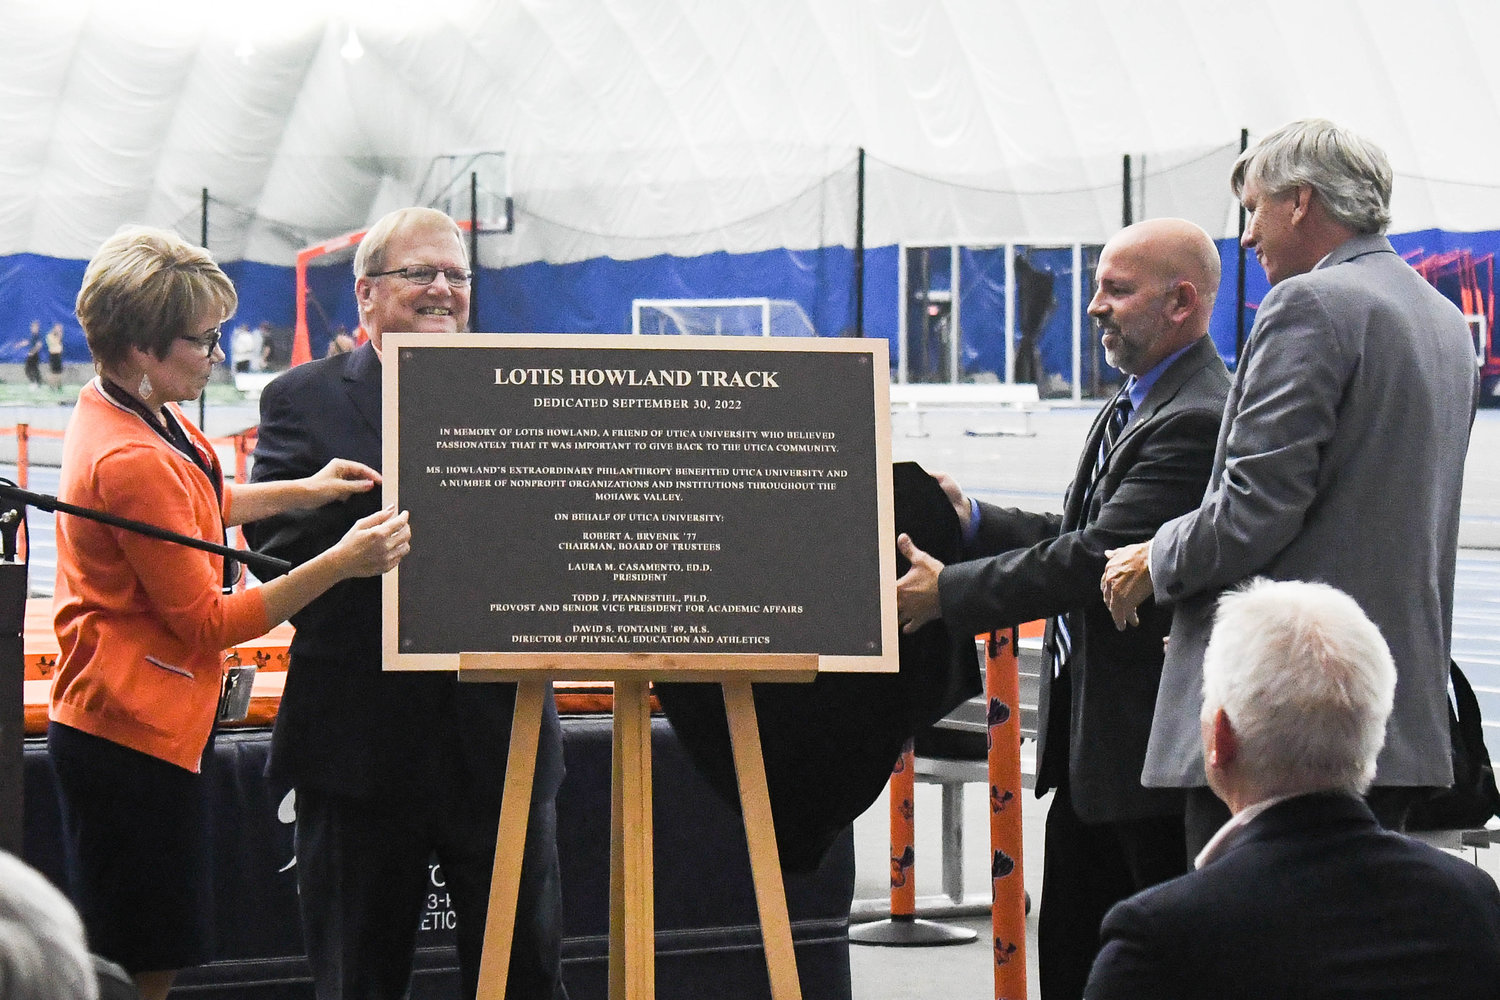 A plaque is revealed during a dedication ceremony for the Lotis Howland Track on Friday at the Todd and Jen Hutton Sports & Recreation Center at Utica University. The plaque, which was unveiled by Utica University President Laura Casamento and Director of Athletics and Physical Education Dave Fontaine, was dedicated in memory of Howland. The plaque says "he was a friend of Utica University who believed passionately that it was important to give back to the Utica community.